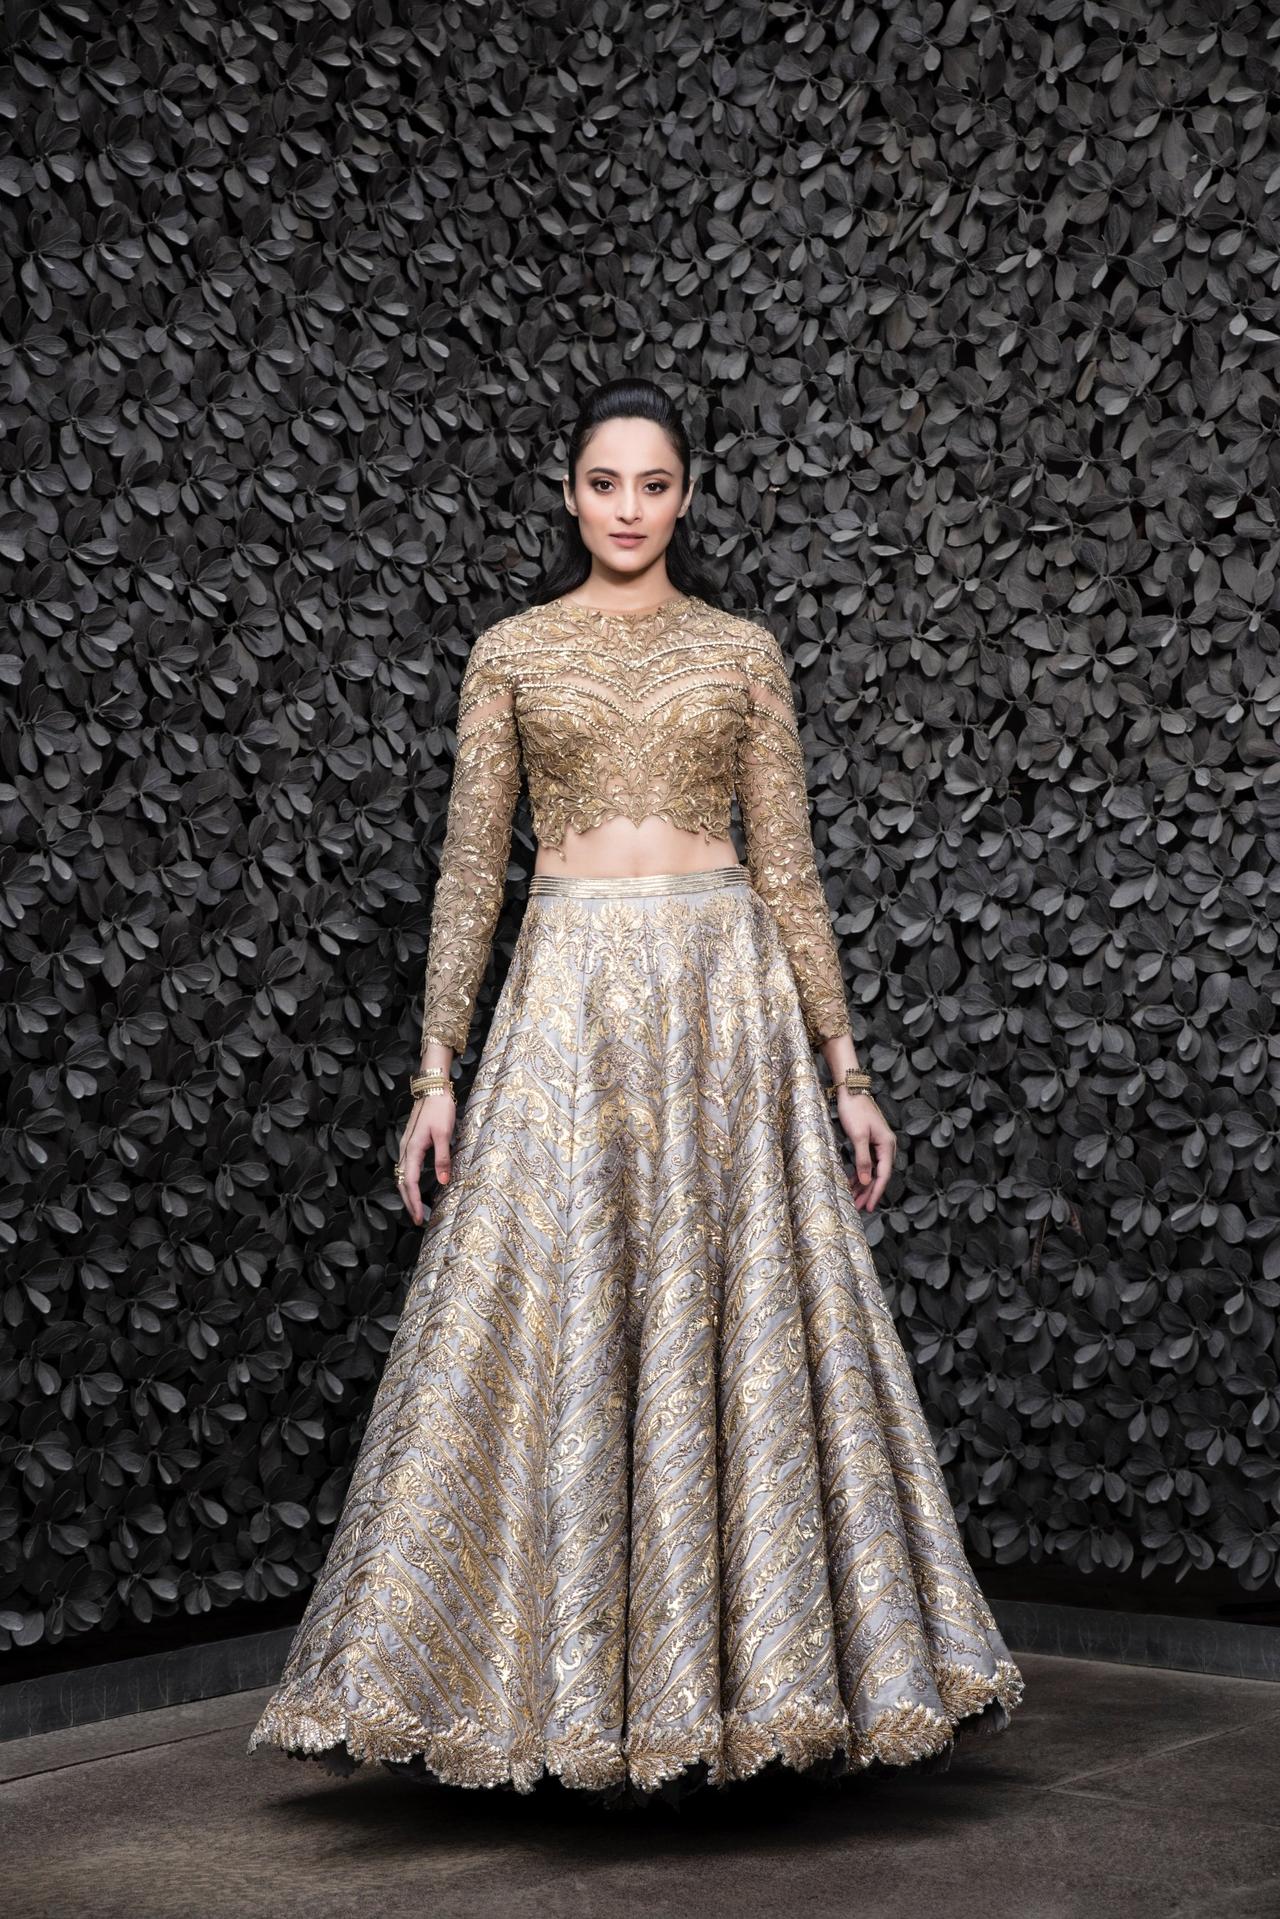 All the stunning brides-to-be and bridesmaids, trust me, you won't want to  miss adding this gem to your wish-list! A perfect lehenga ... | Instagram